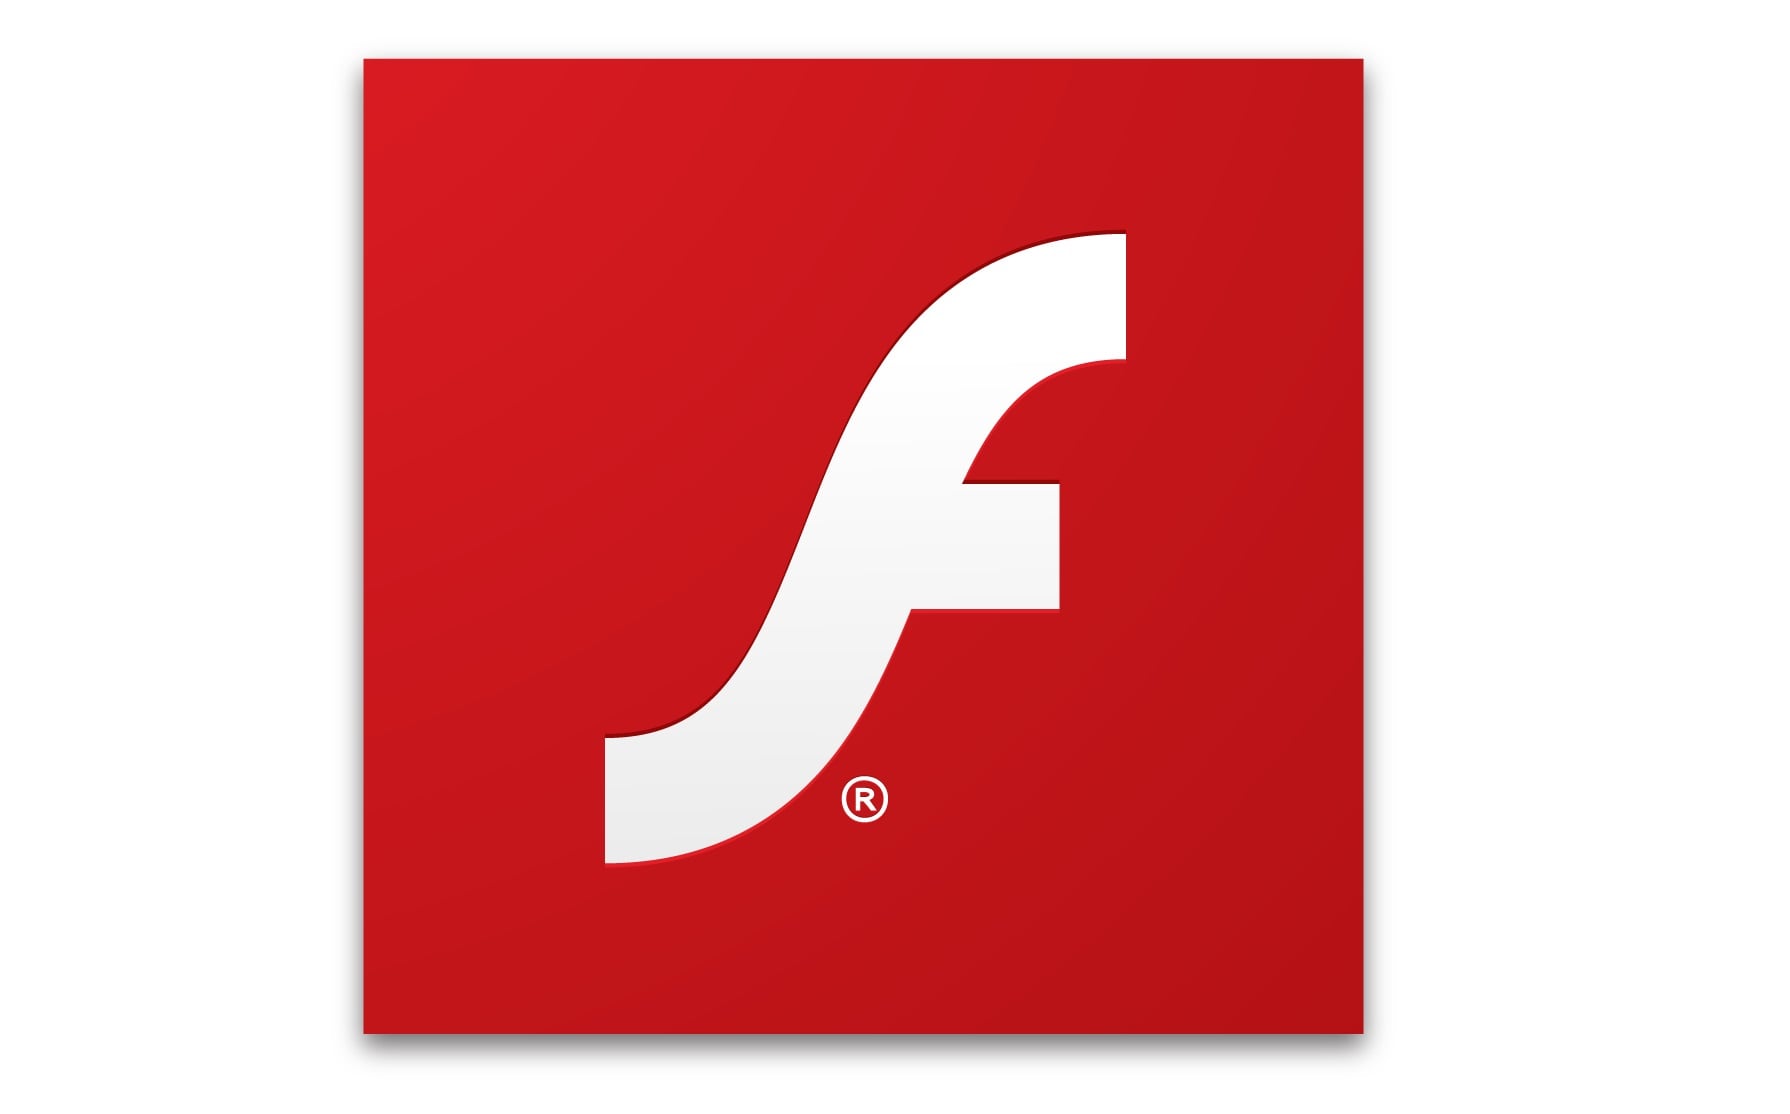 The End is Coming Soon for Adobe Flash